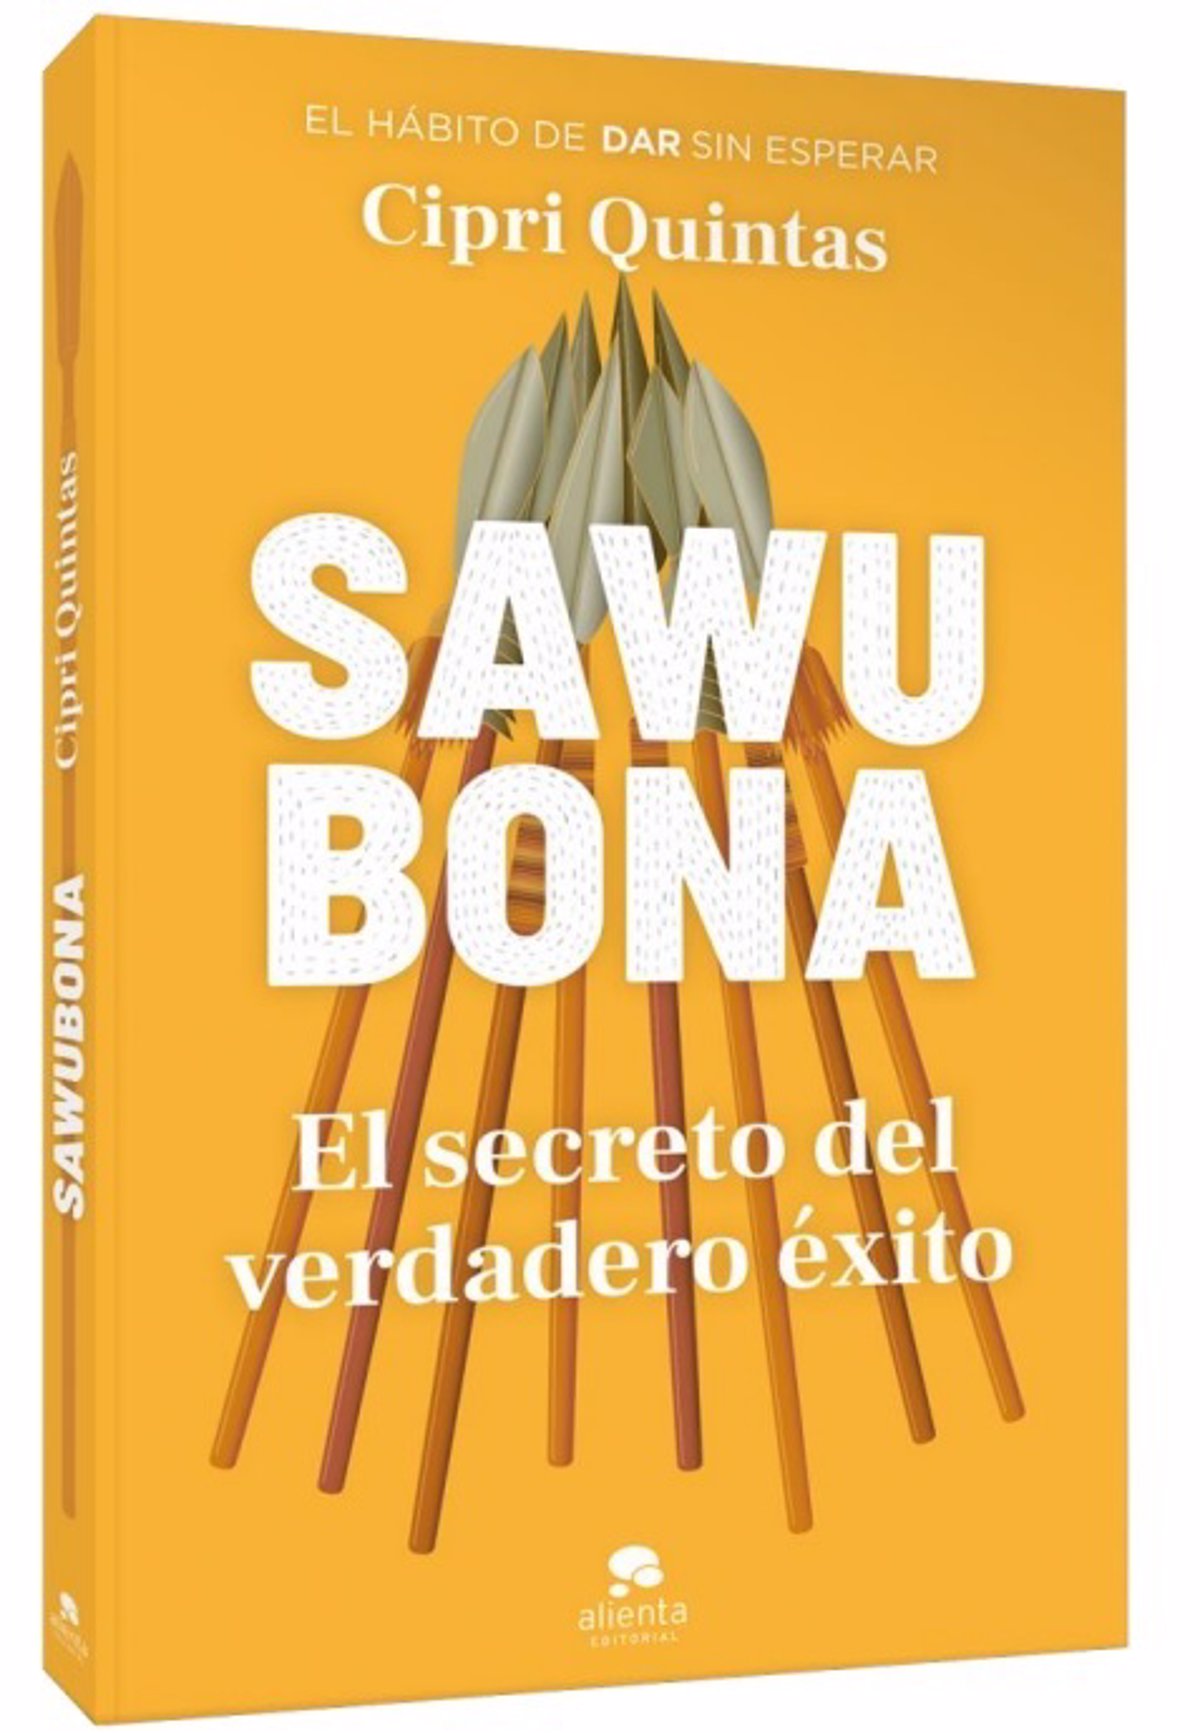 Entrepreneur Cipri Quintas in “Sawubona” ​​suggests increasing kindness and confidence in work, life, and relationships